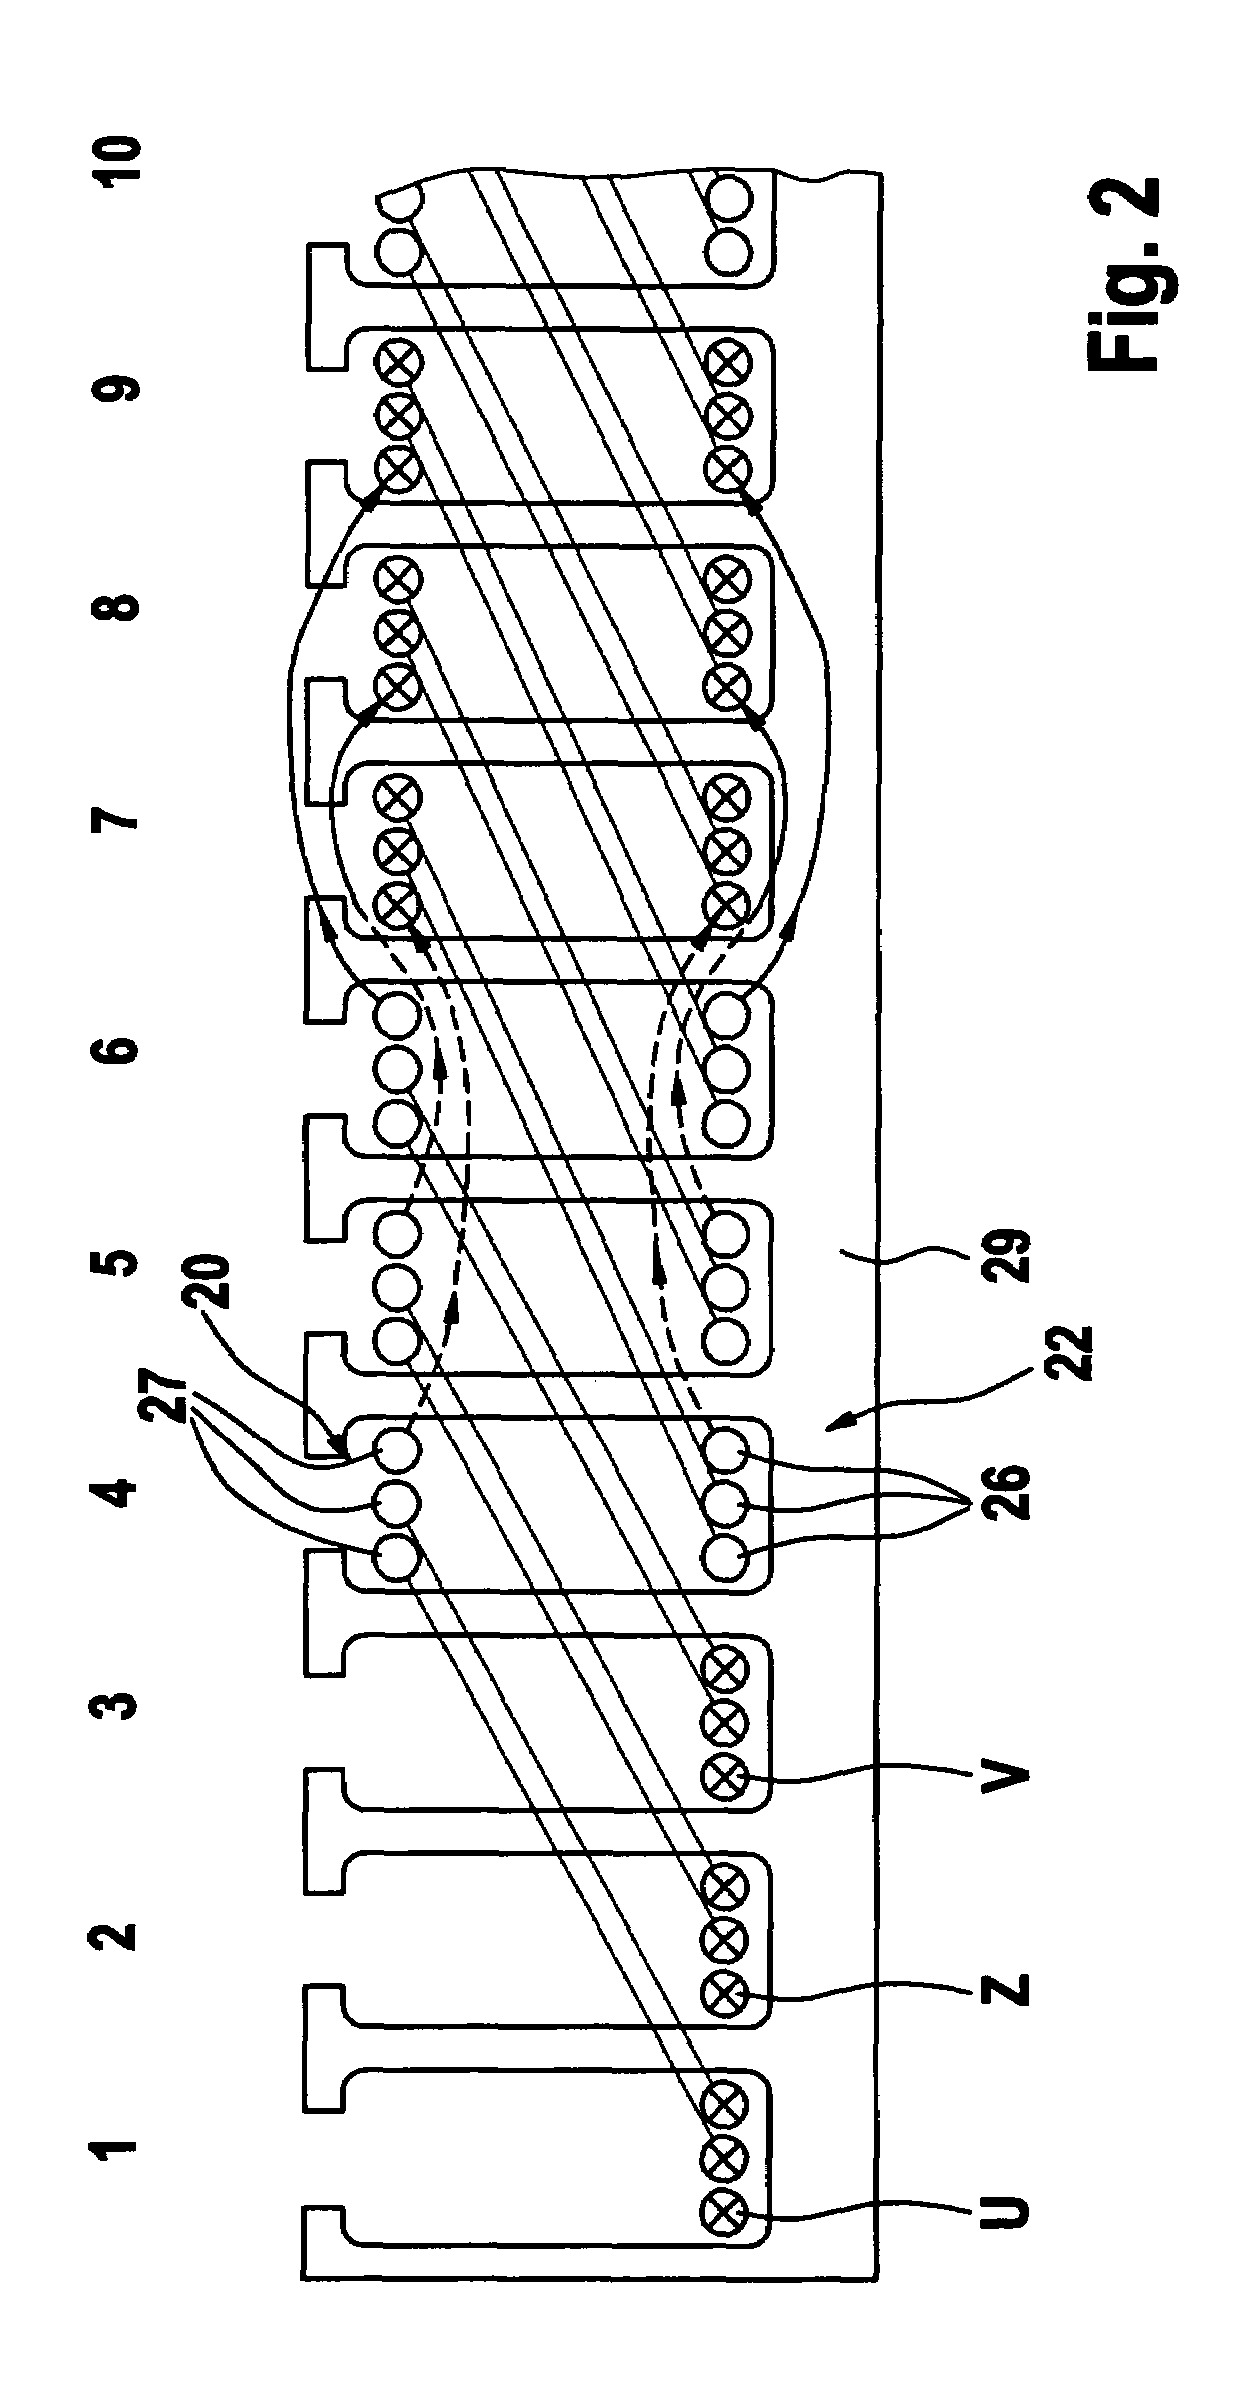 Method of making a two-layer lap winding for a multiphase electrical machine